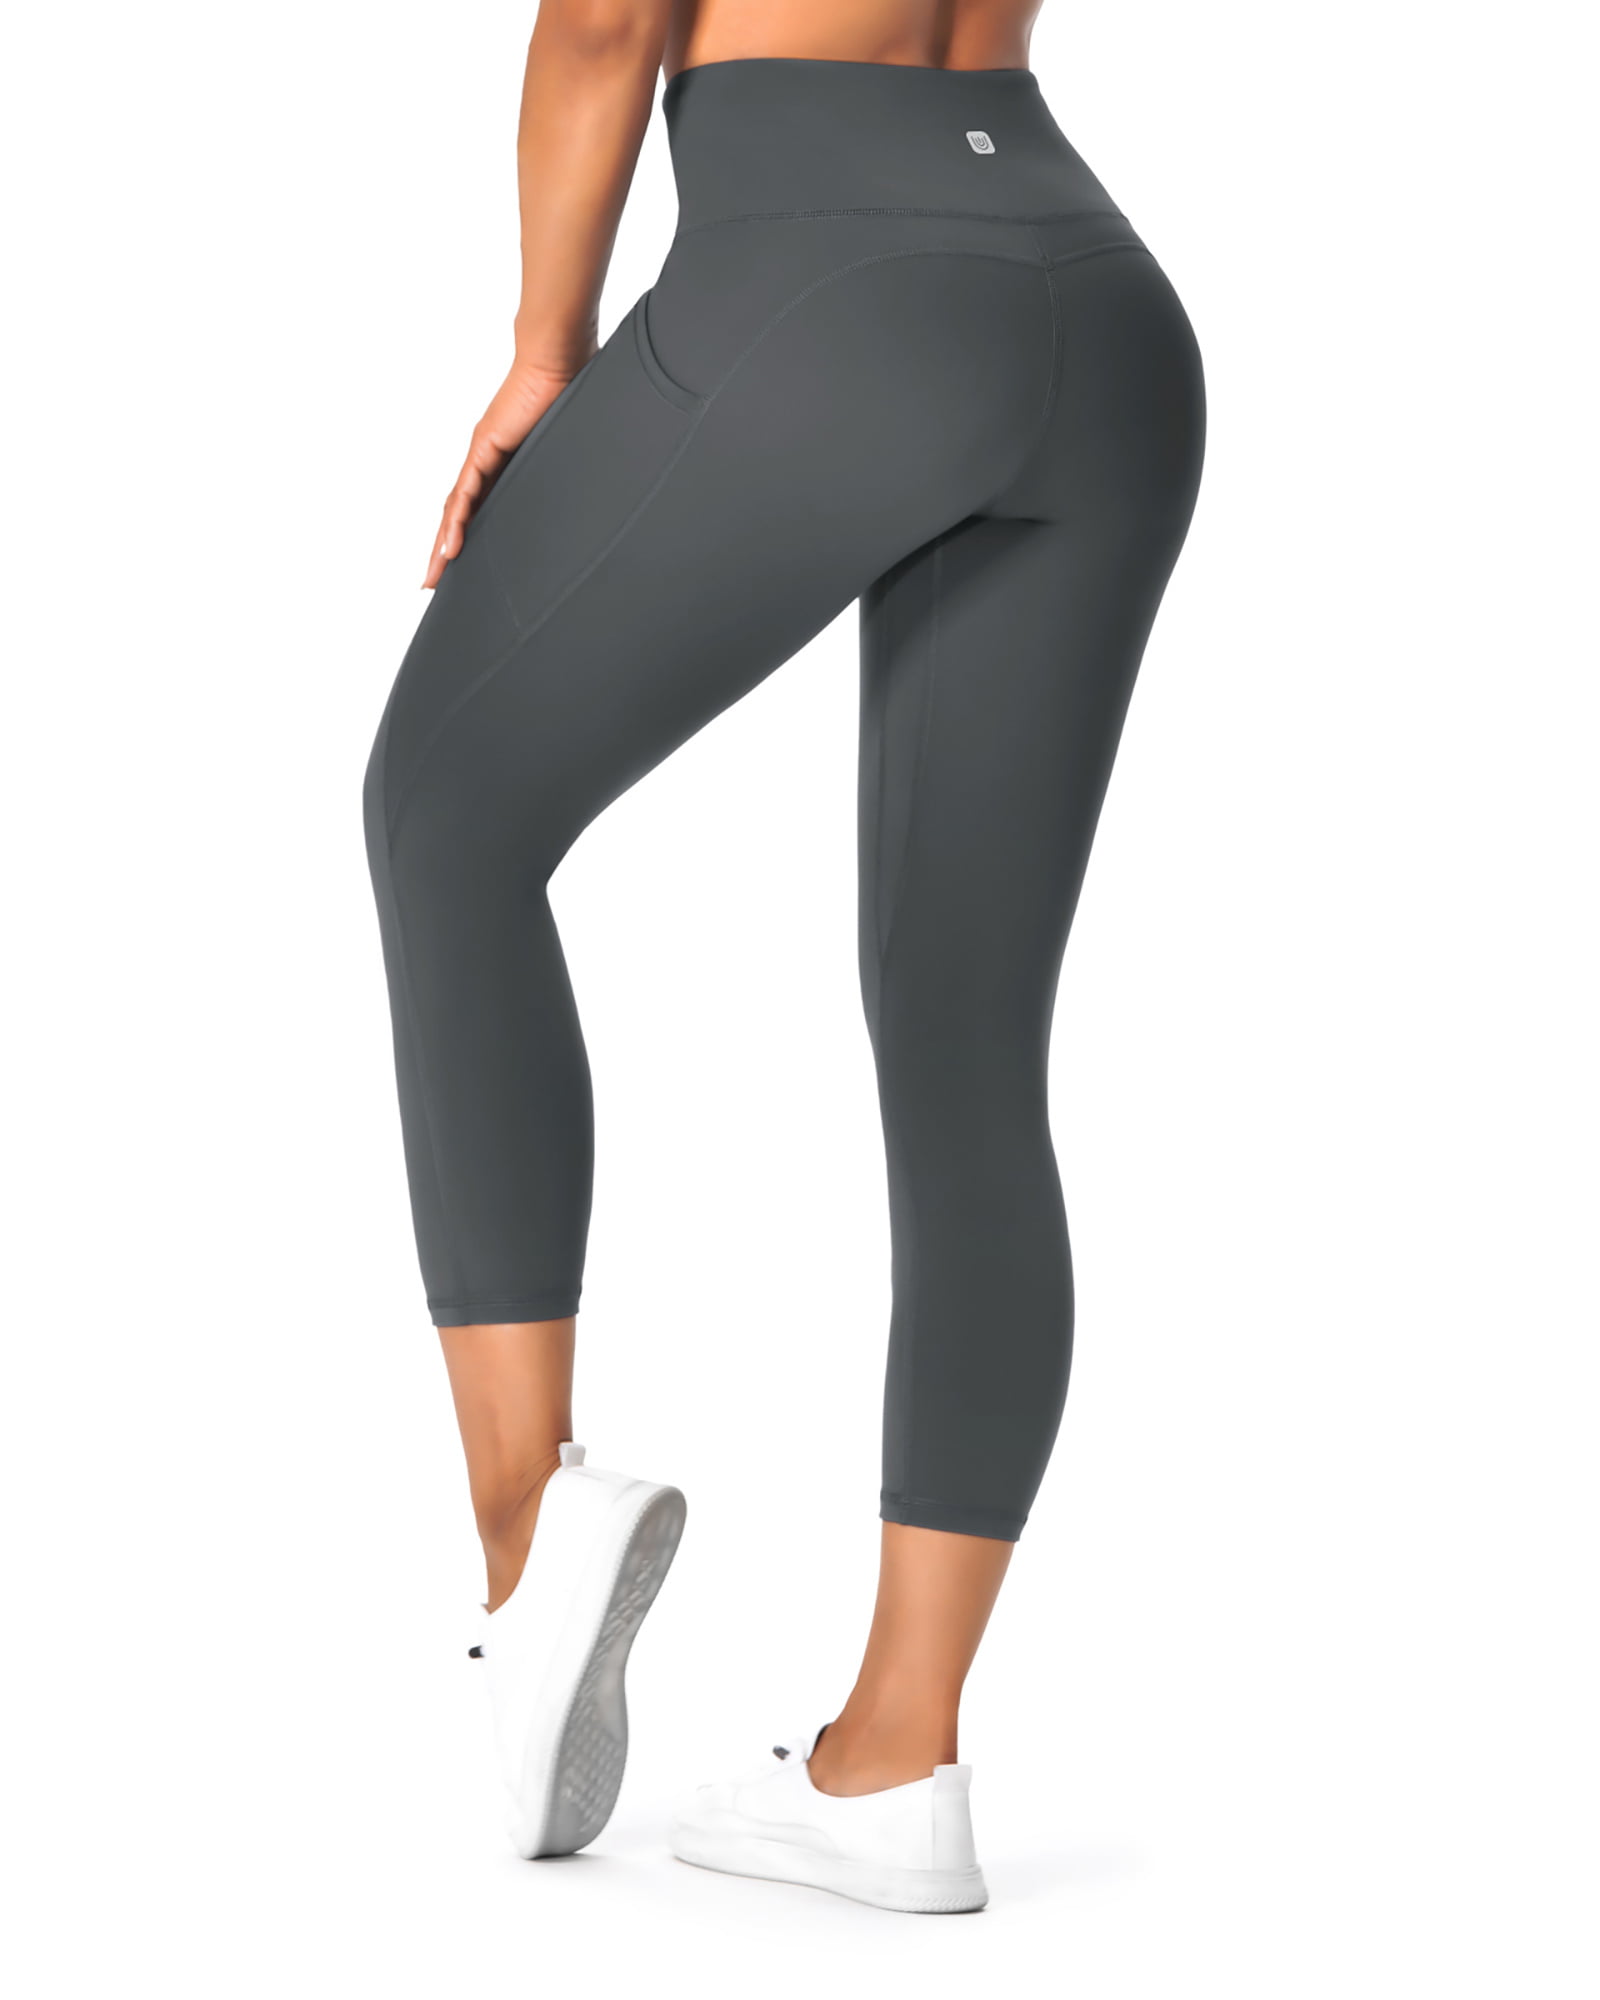 UUE 21 Inseam Olive Workout Leggings for Women,Yoga Capris with Pockets  Tummy Control, Butt Lifting Leggings for women workout 